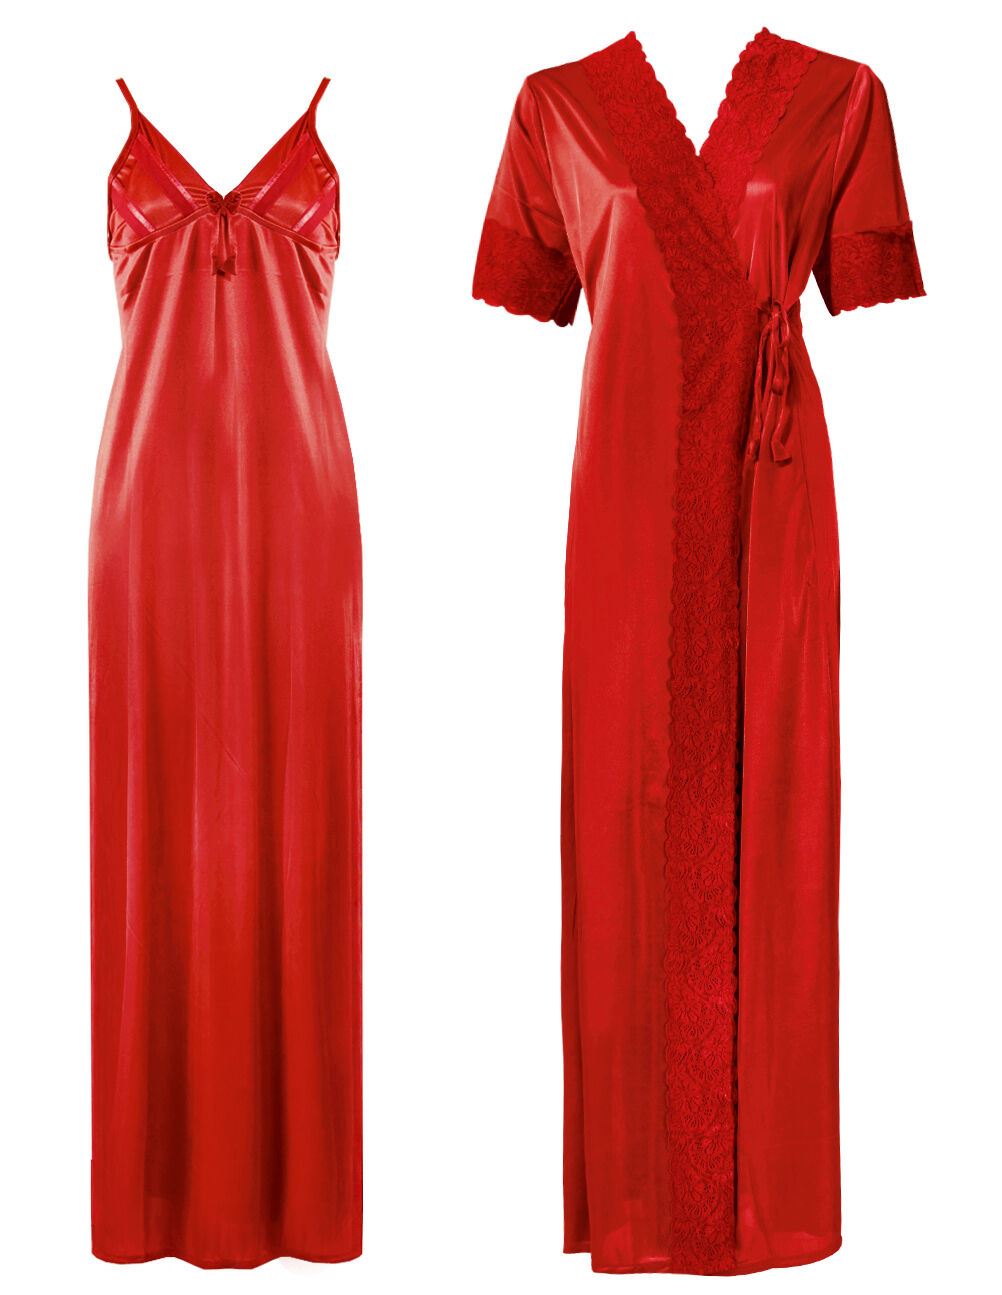 Red / One Size: Regular (8-14) Satin Strappy Long Nighty With Dressing Gown / Robe The Orange Tags